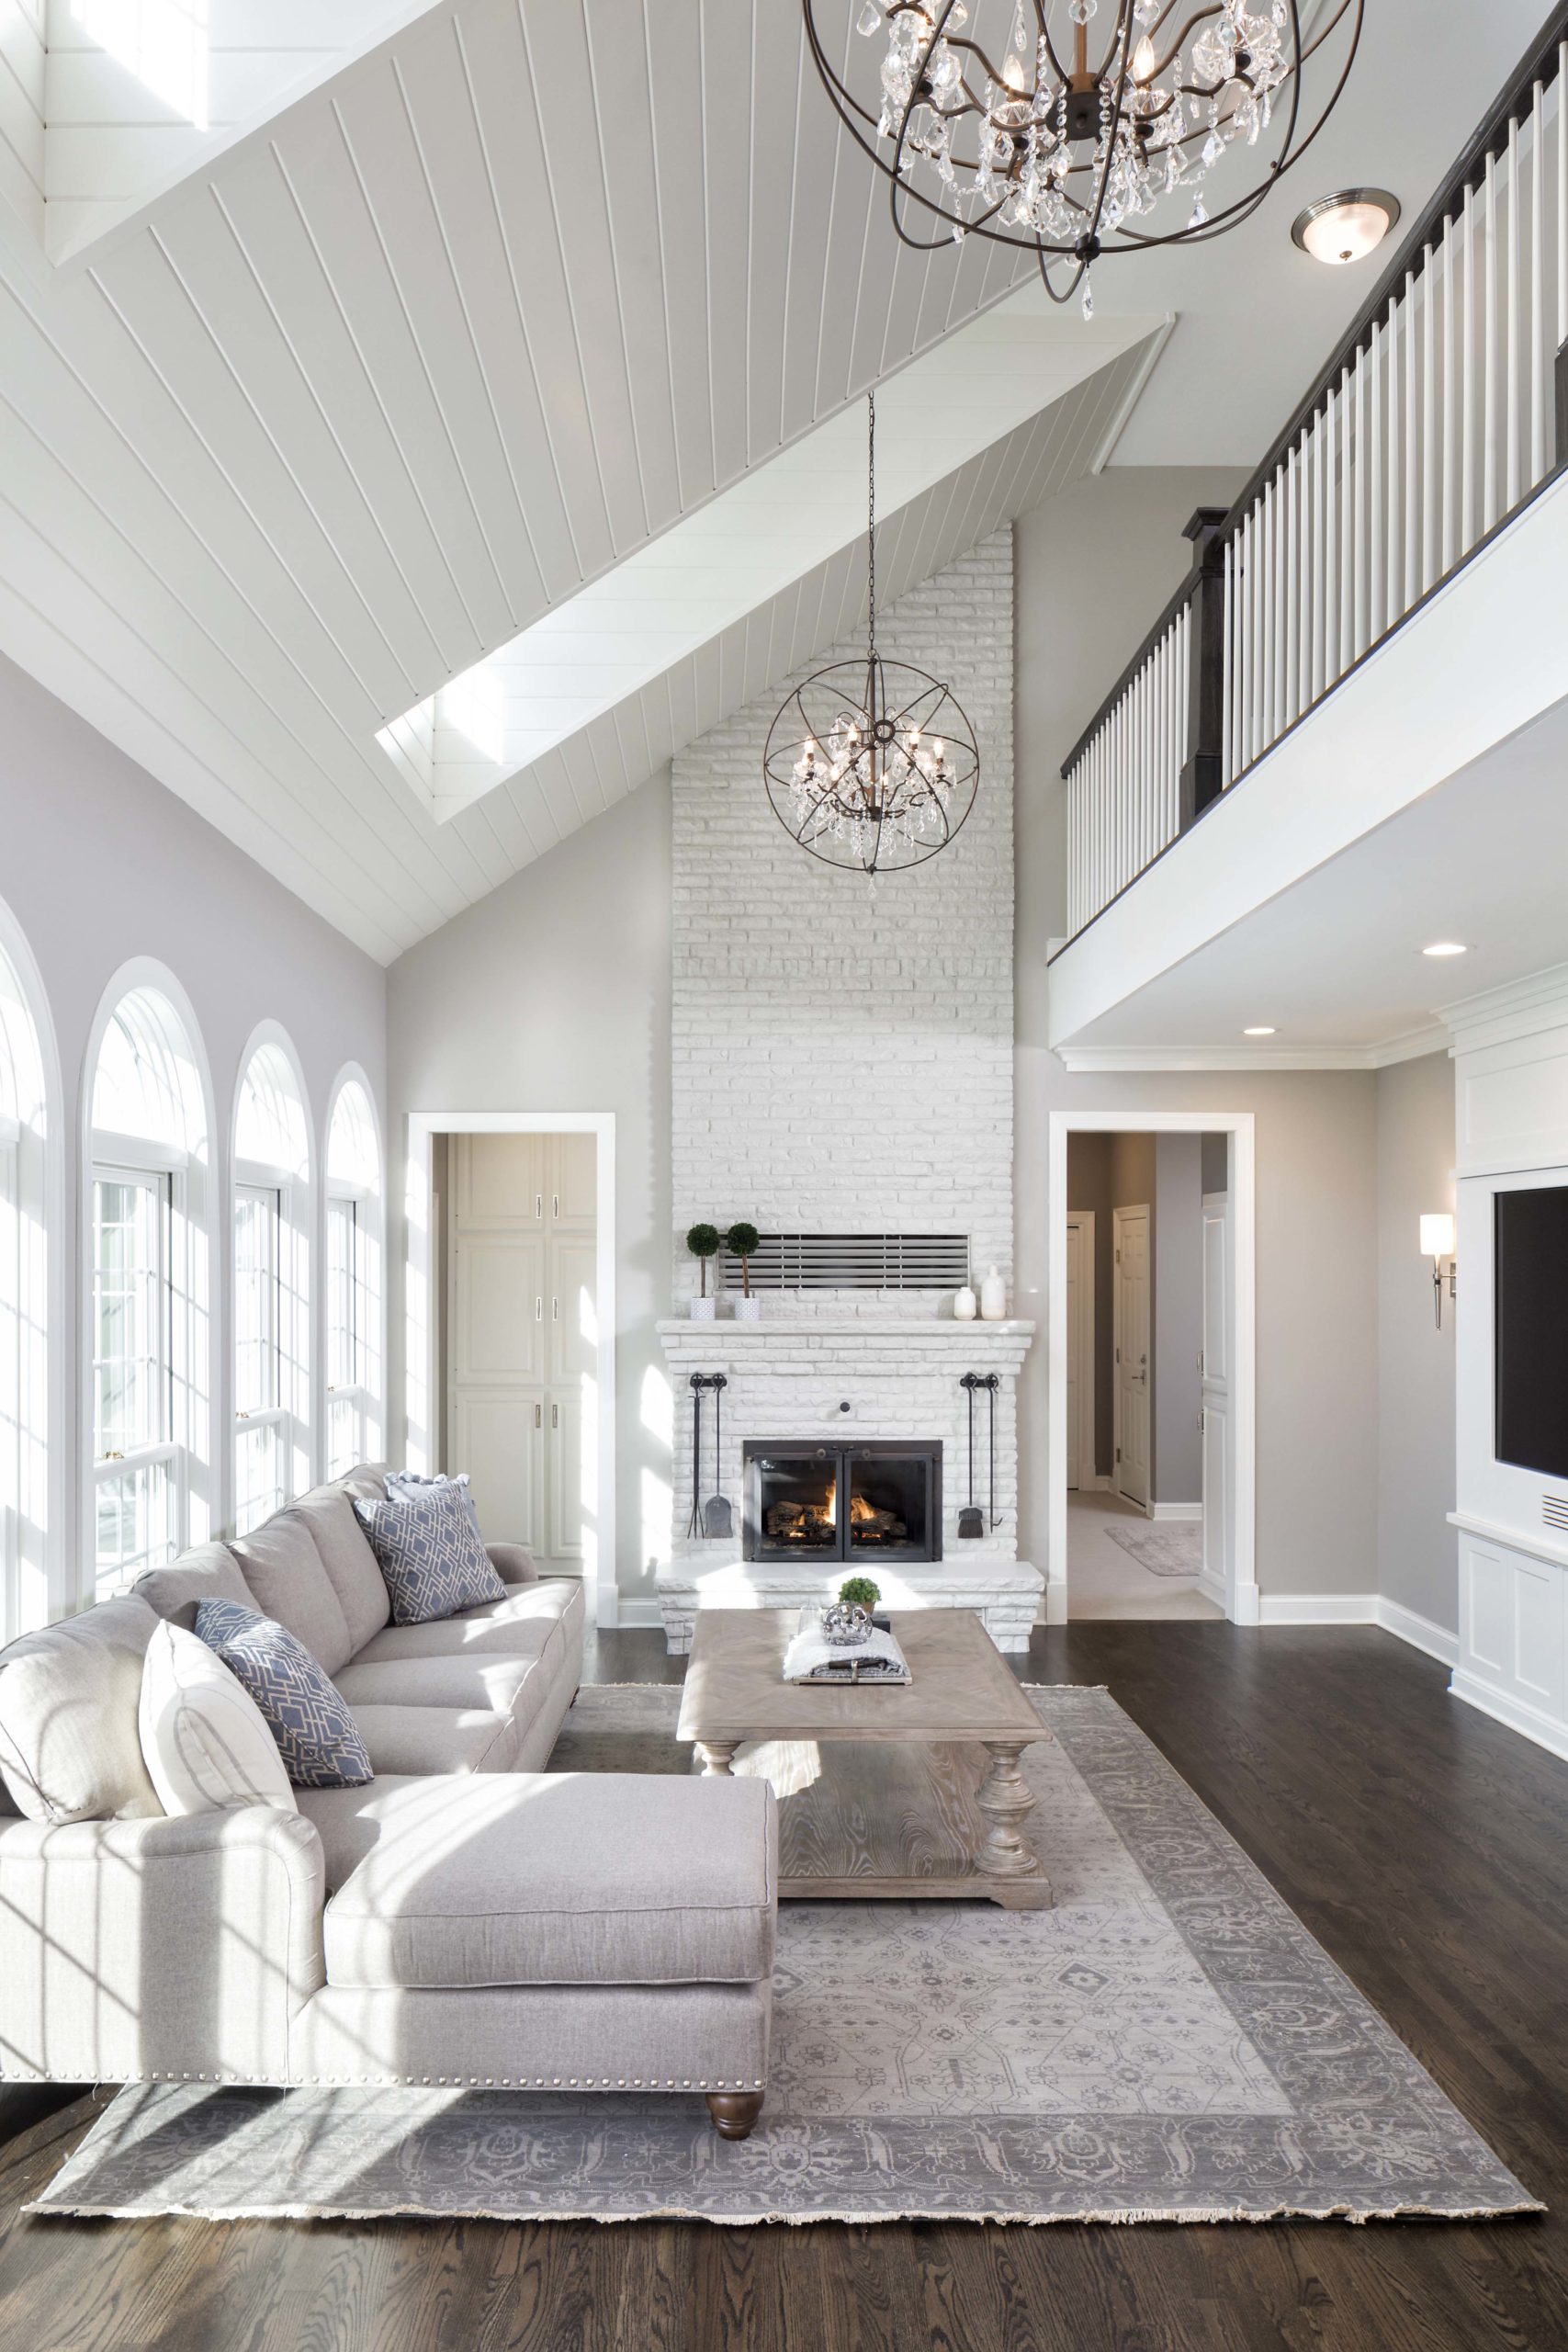 living room with two story ceilings, a sectional couch on the left, and a white brick fireplace on the back wall